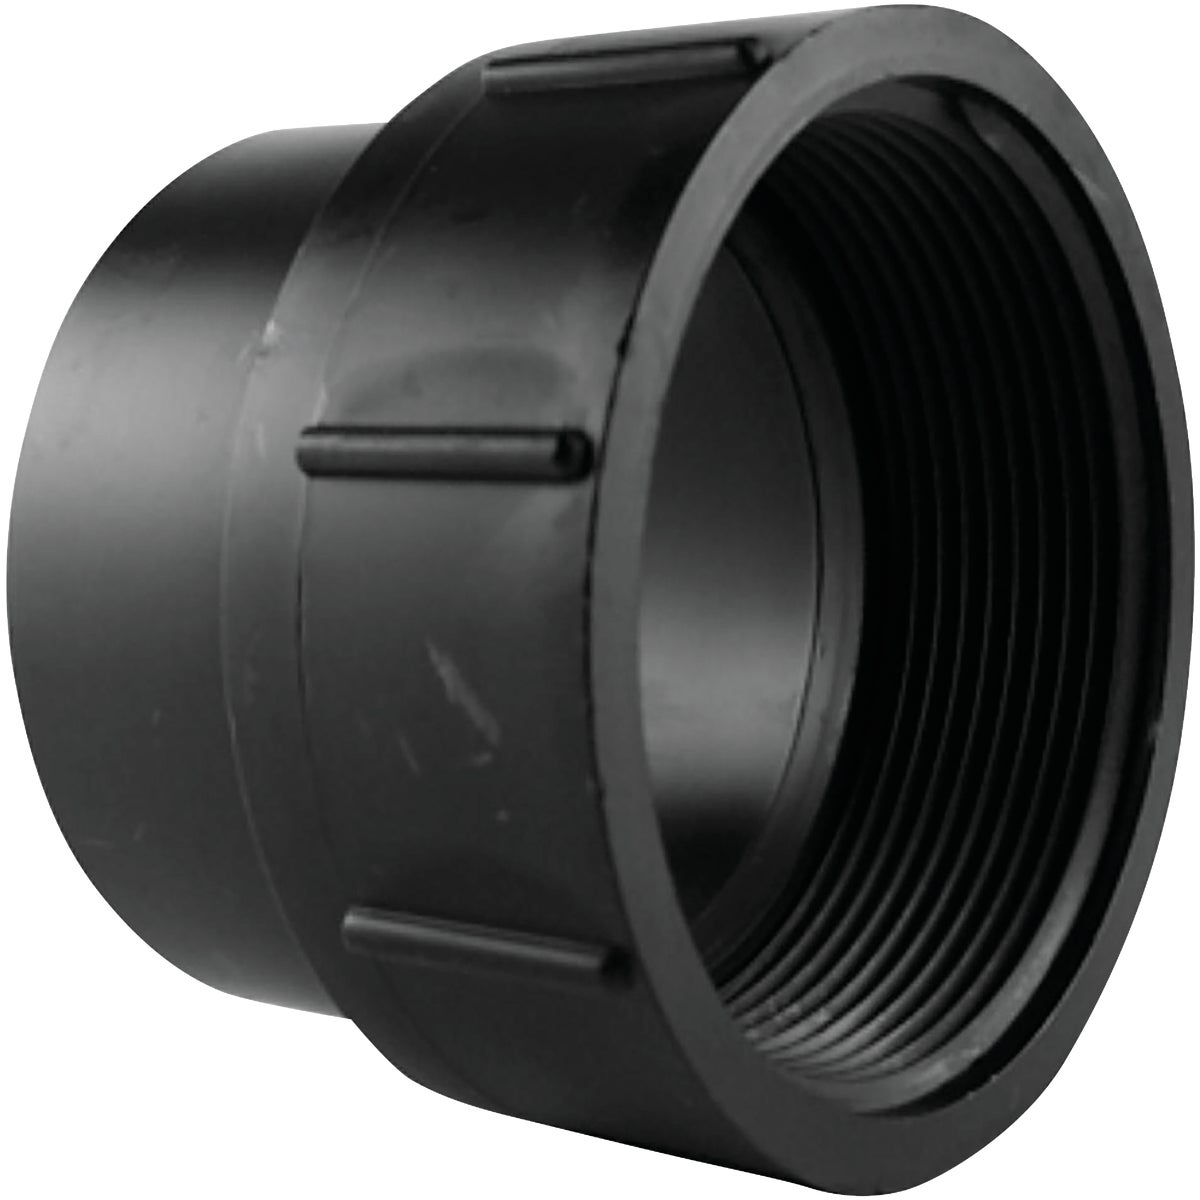 Item 418285, Conventional threaded cleanout fitting solvent welds into fitting hub and 